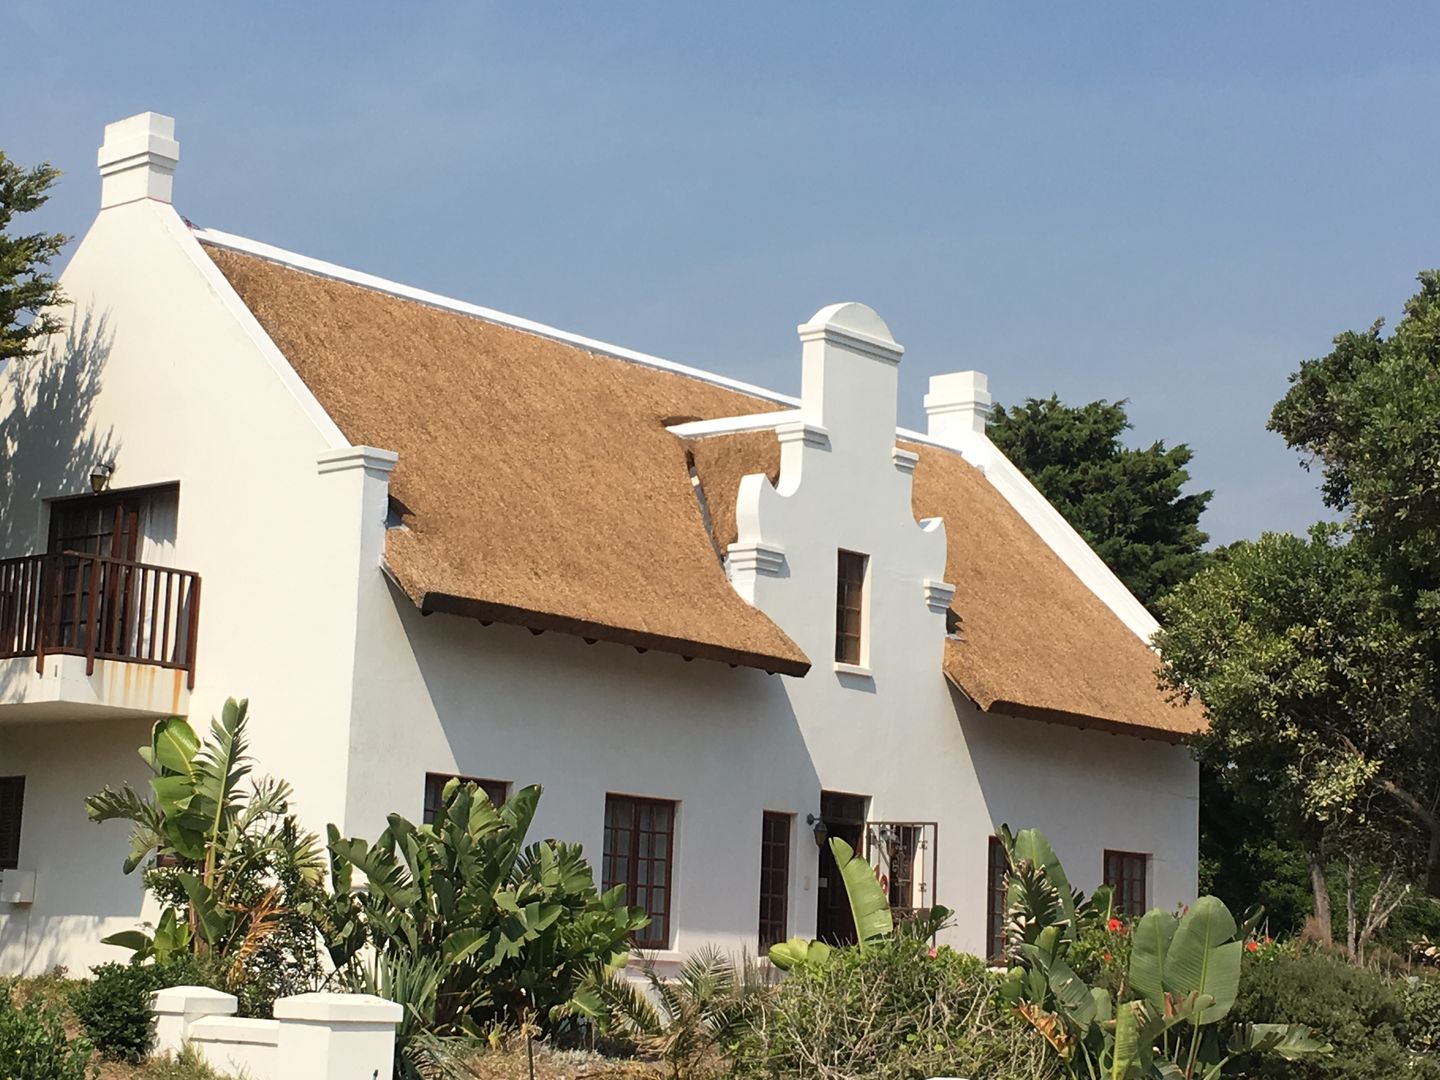 Colonial Style Home with Thatched Roof Bosazza Roofing & Timber Homes Colonial style house